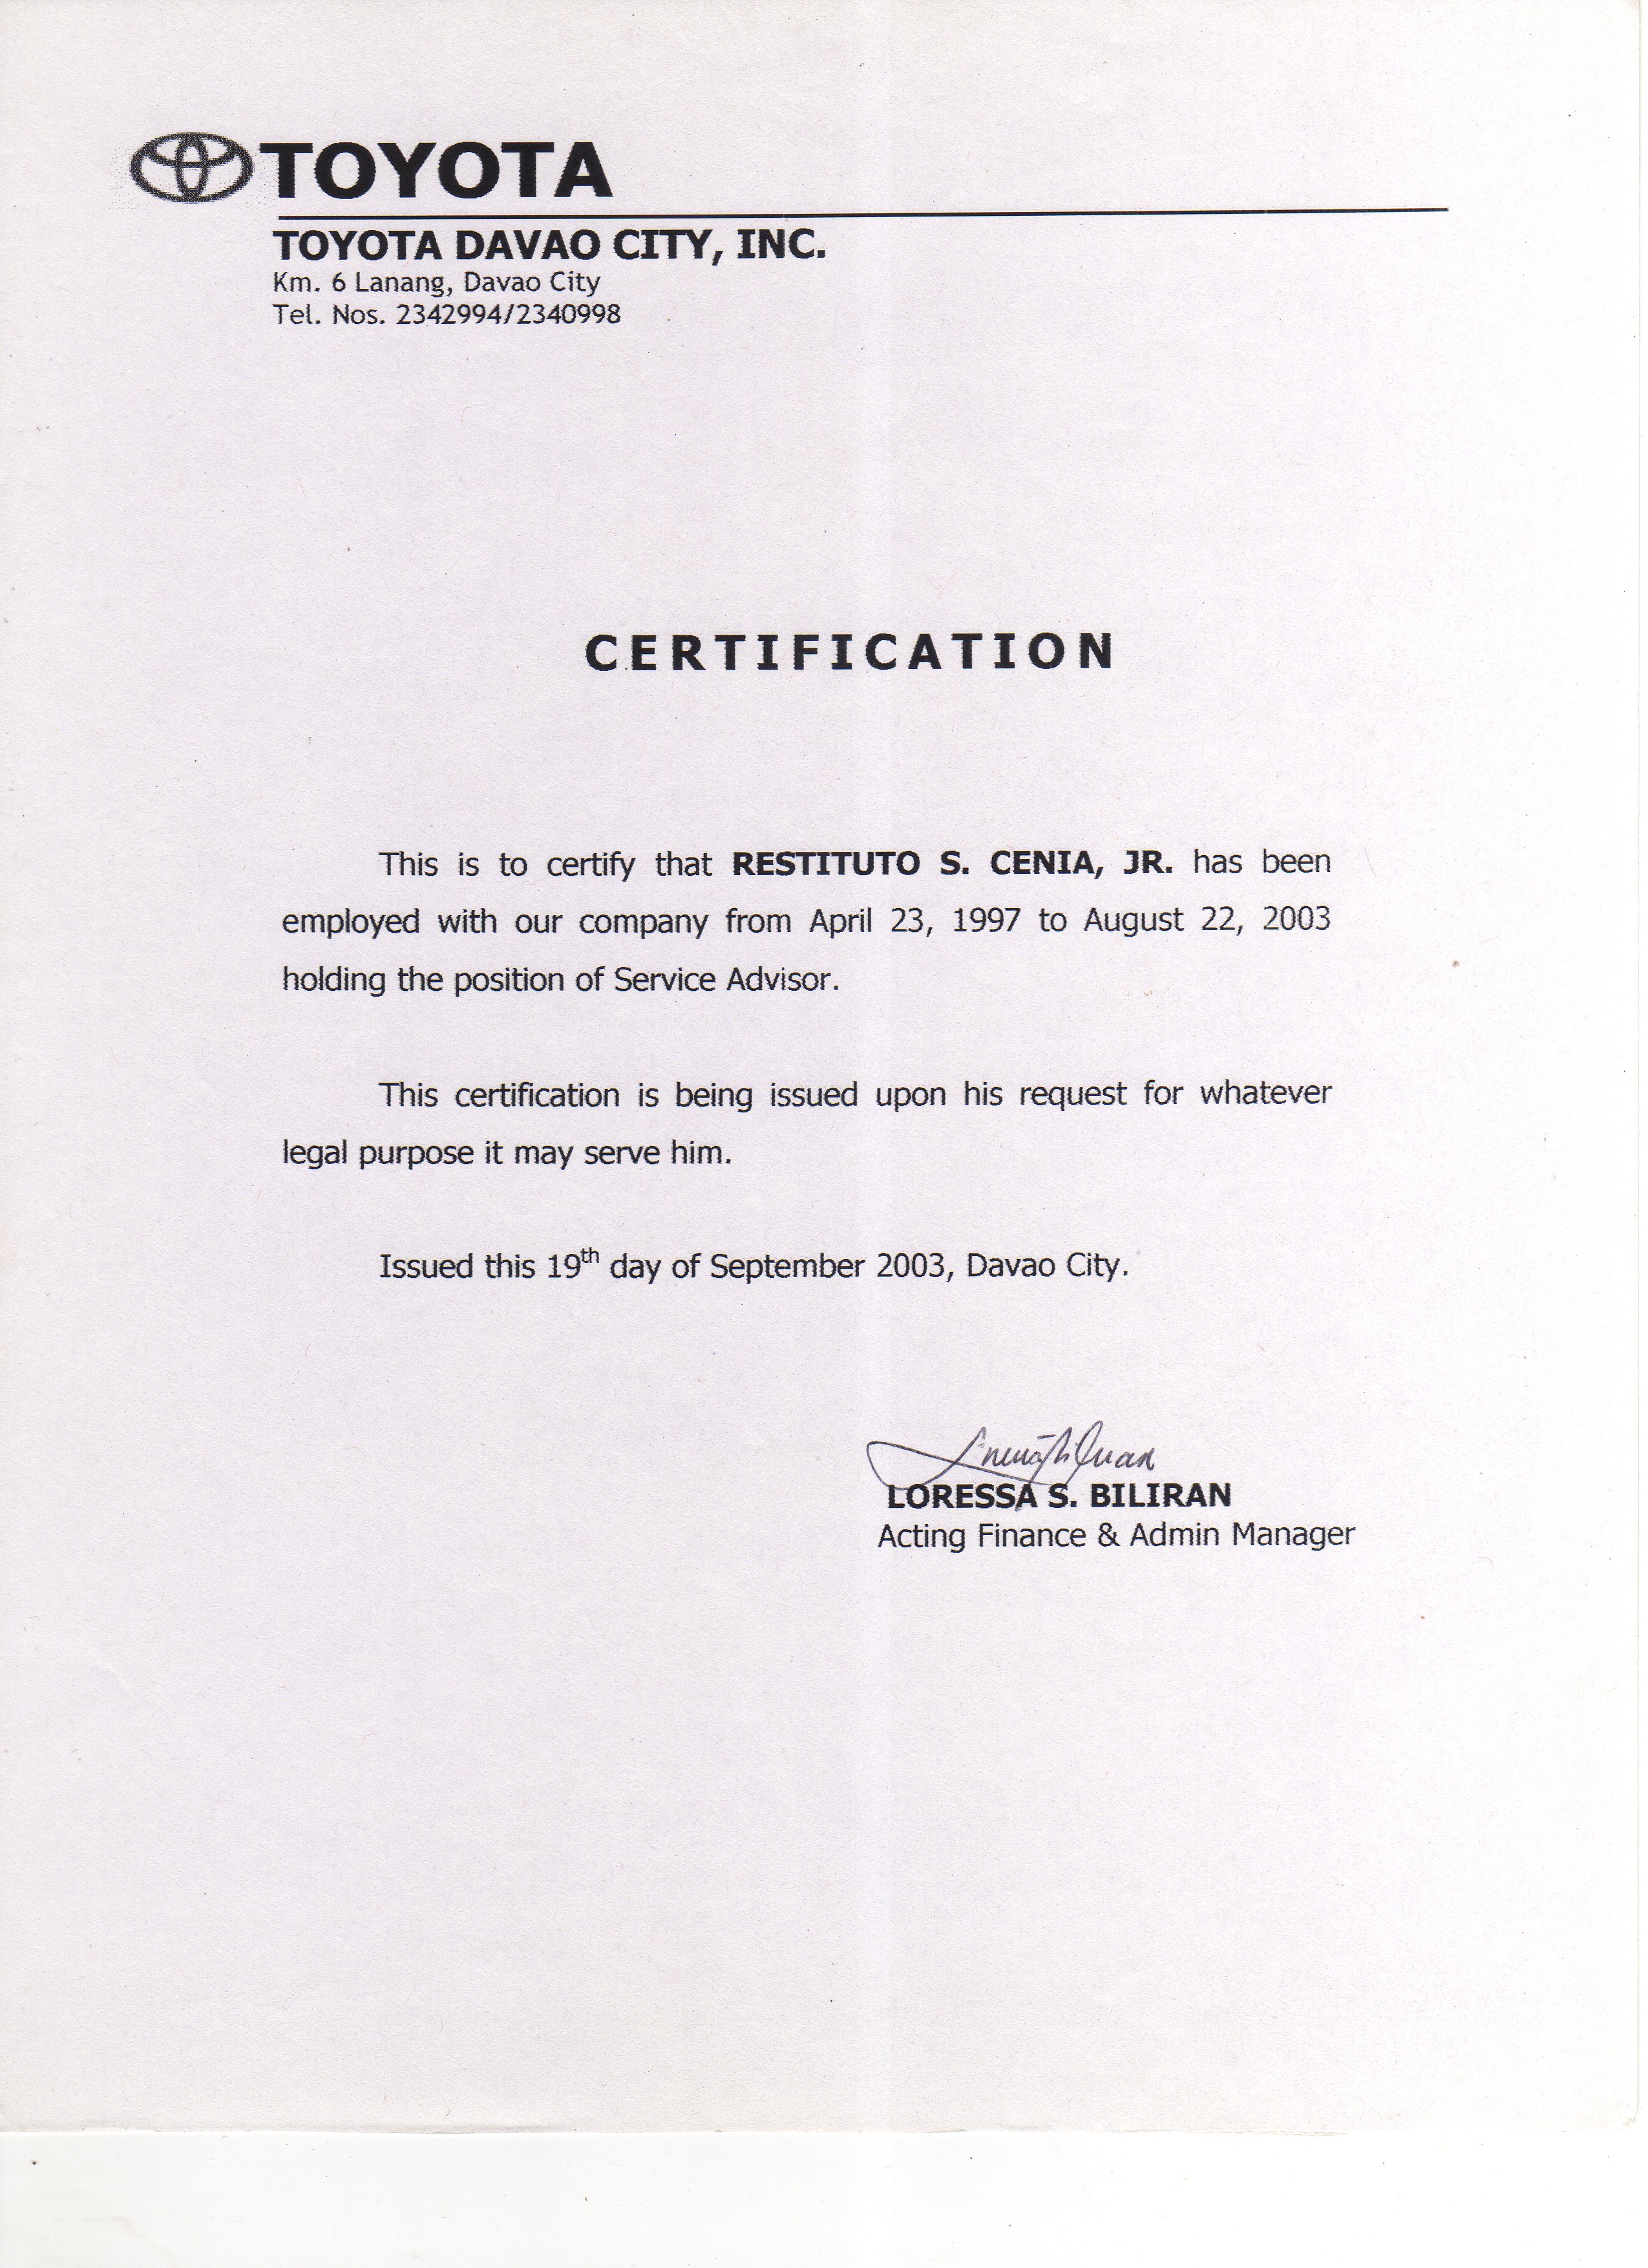 Certificate of Employment Sample.docx